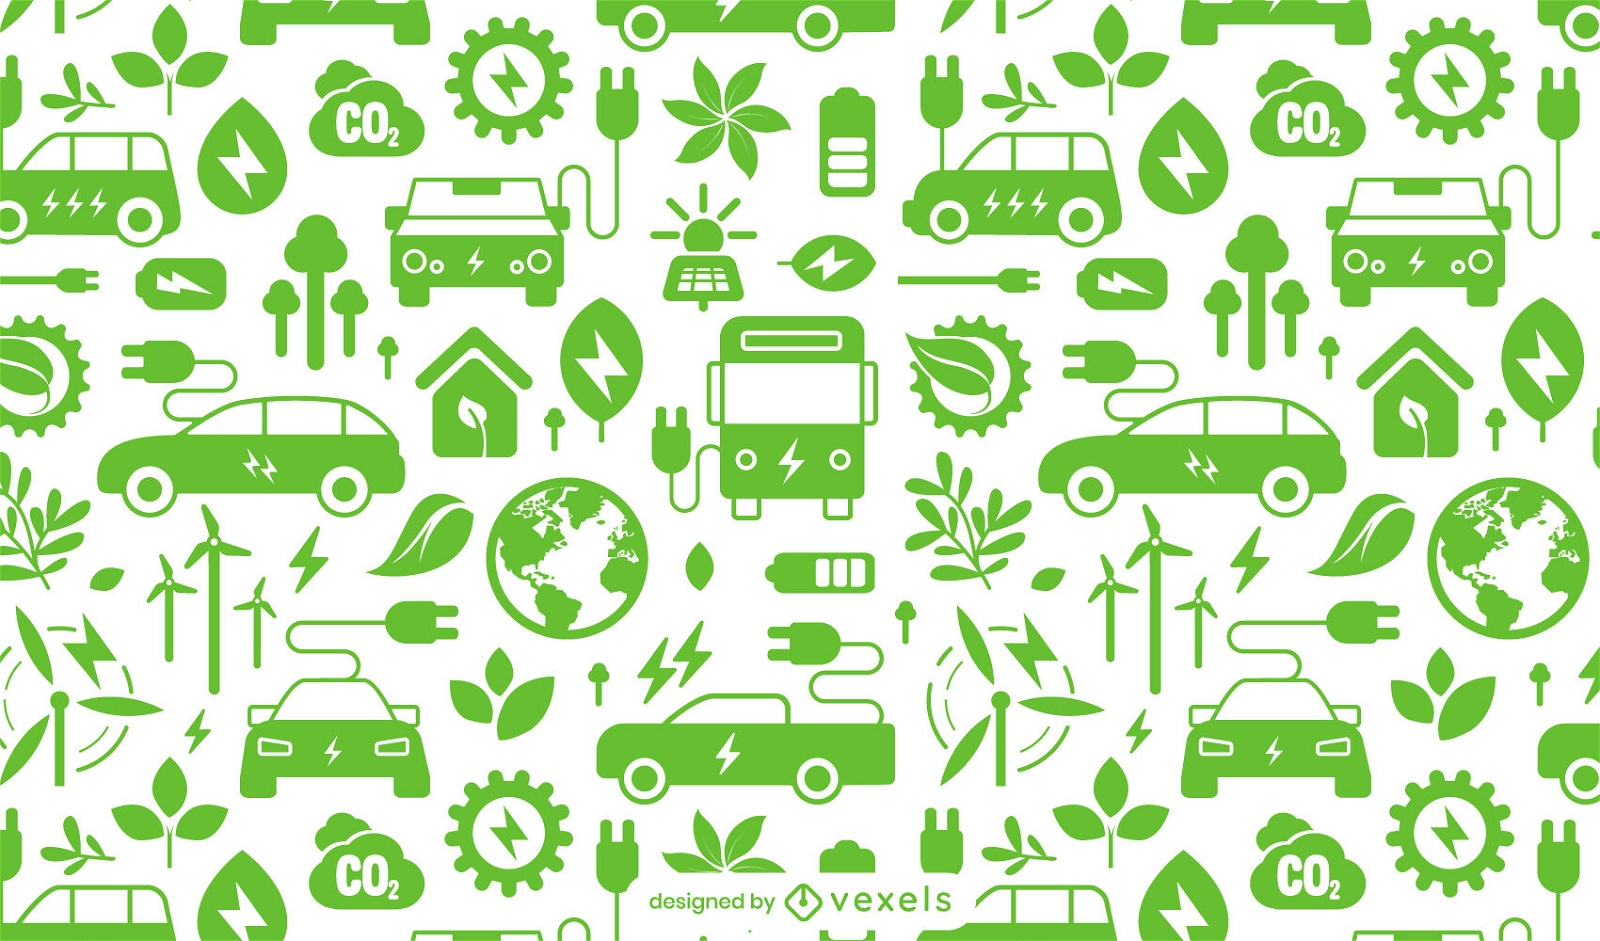 Electric car and ecology elements pattern design